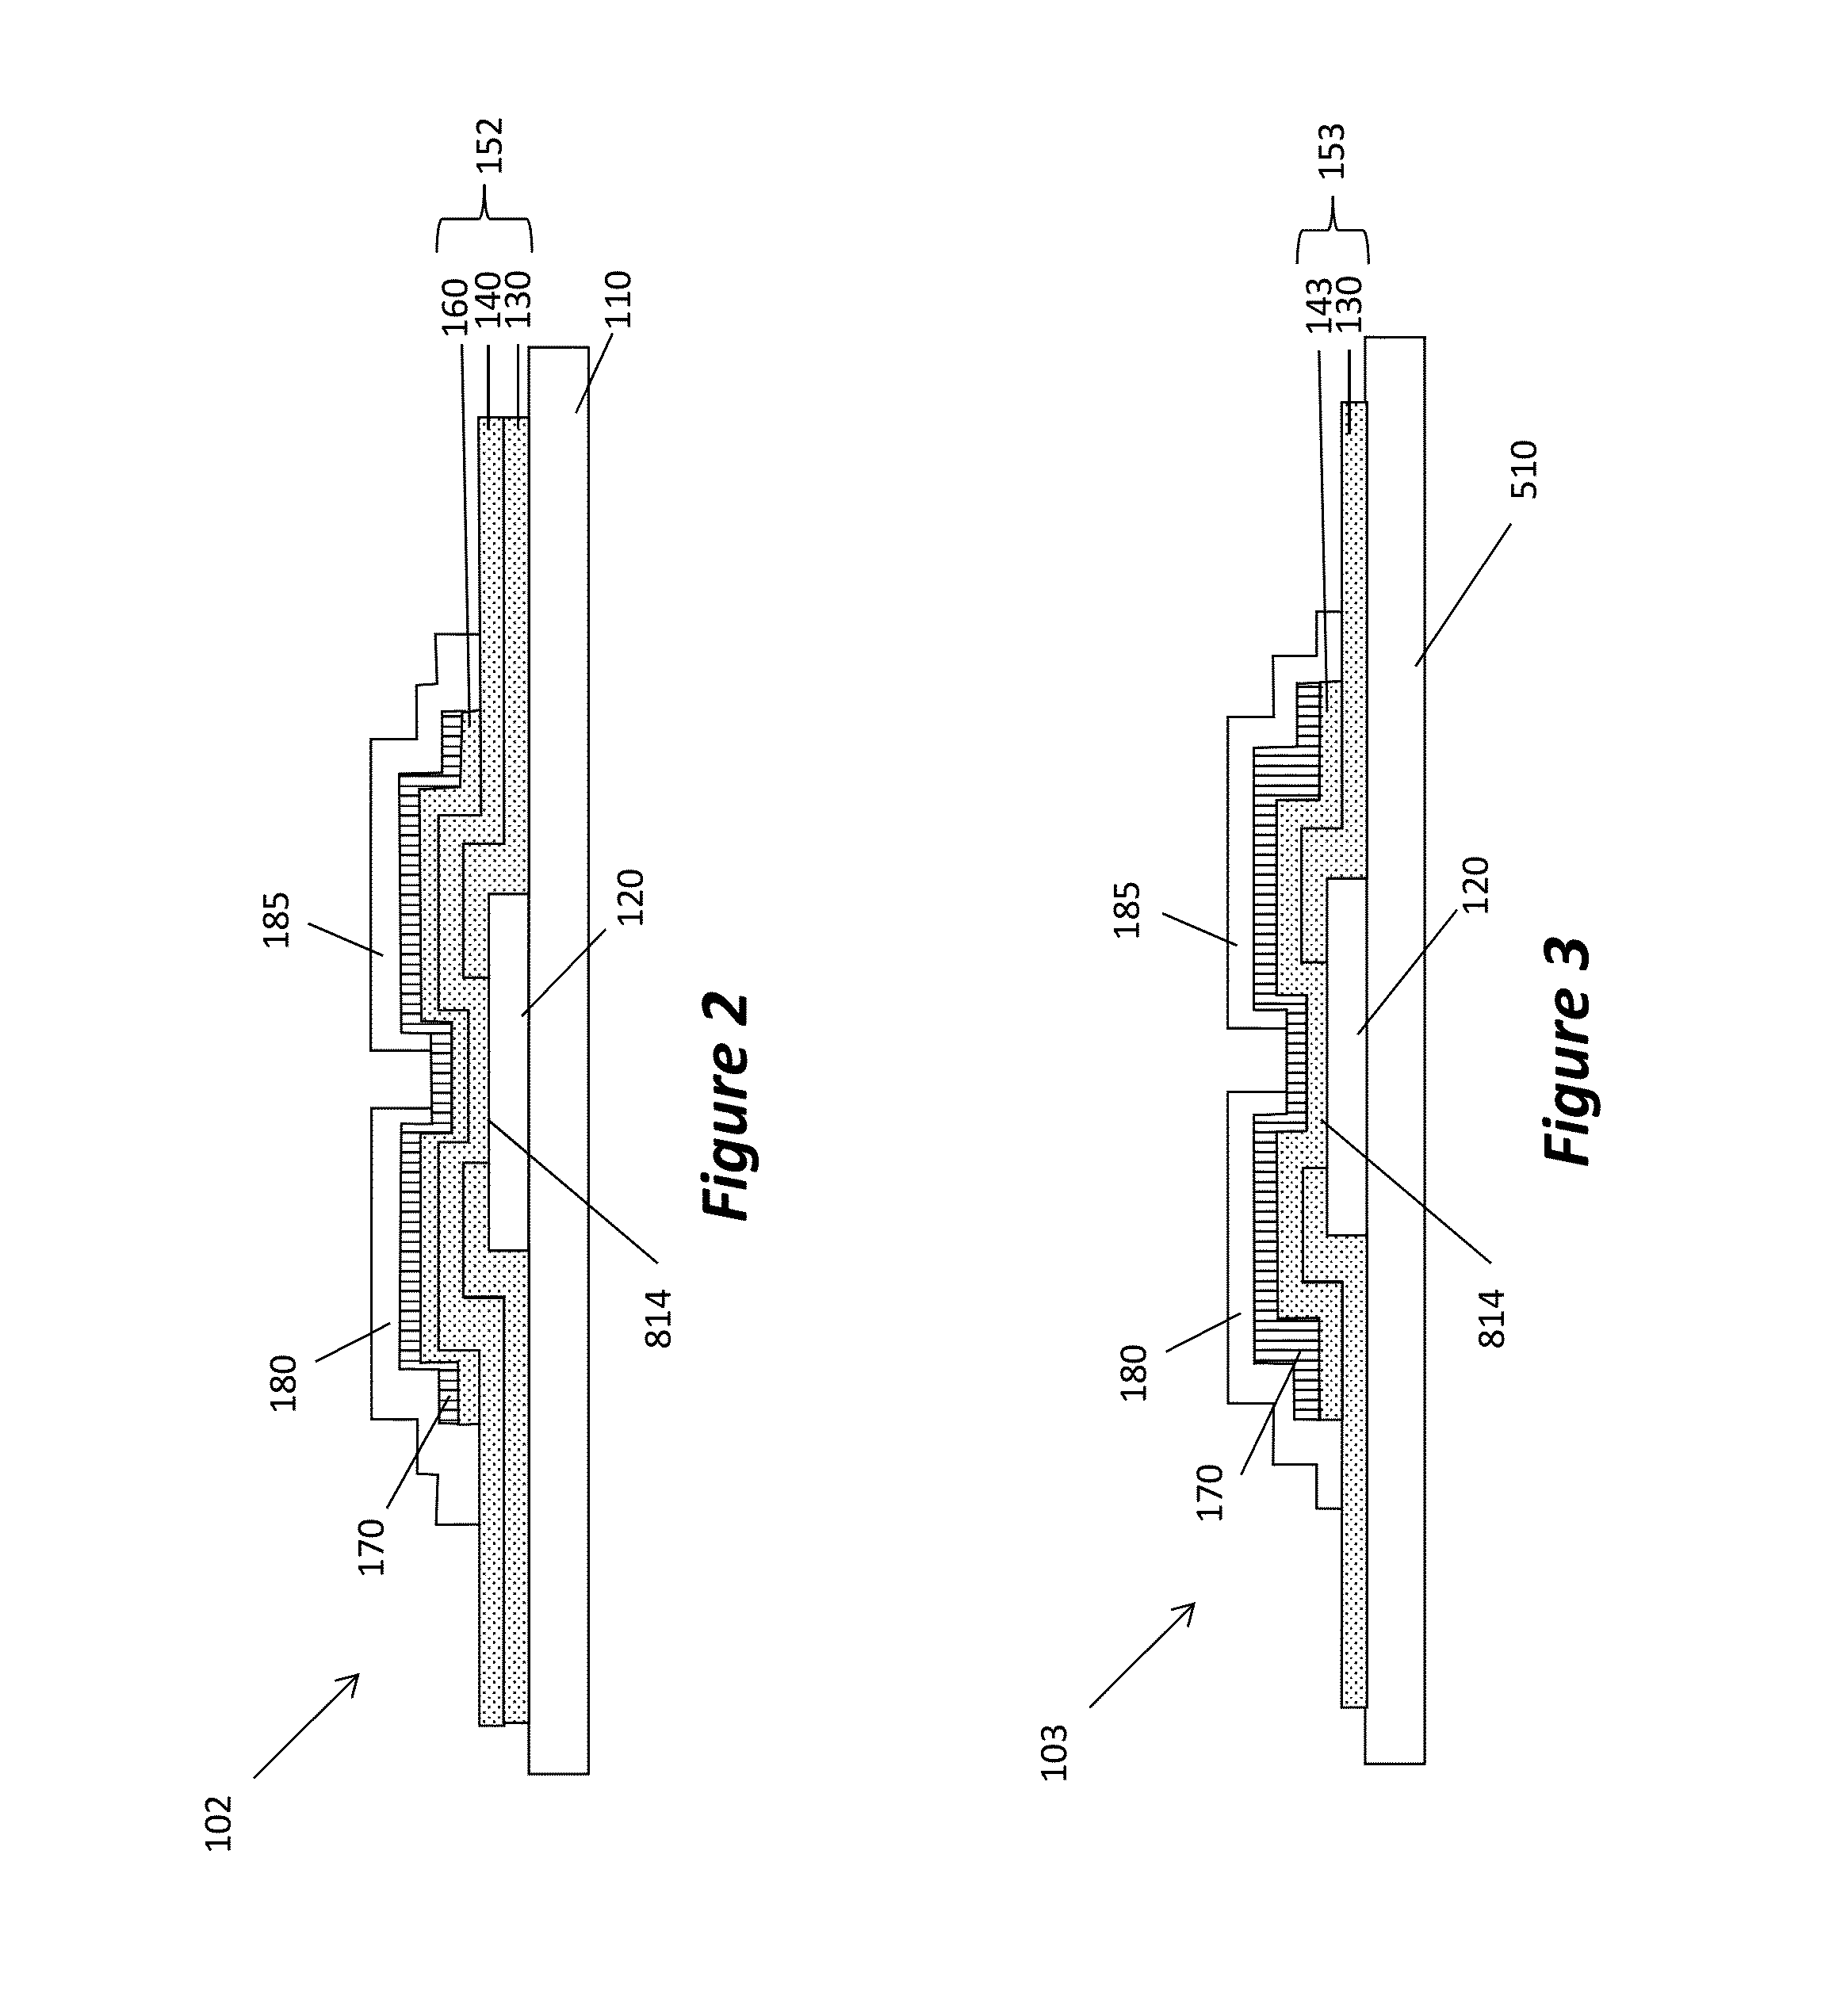 Enhancement-depletion mode inverter with two transistor architectures